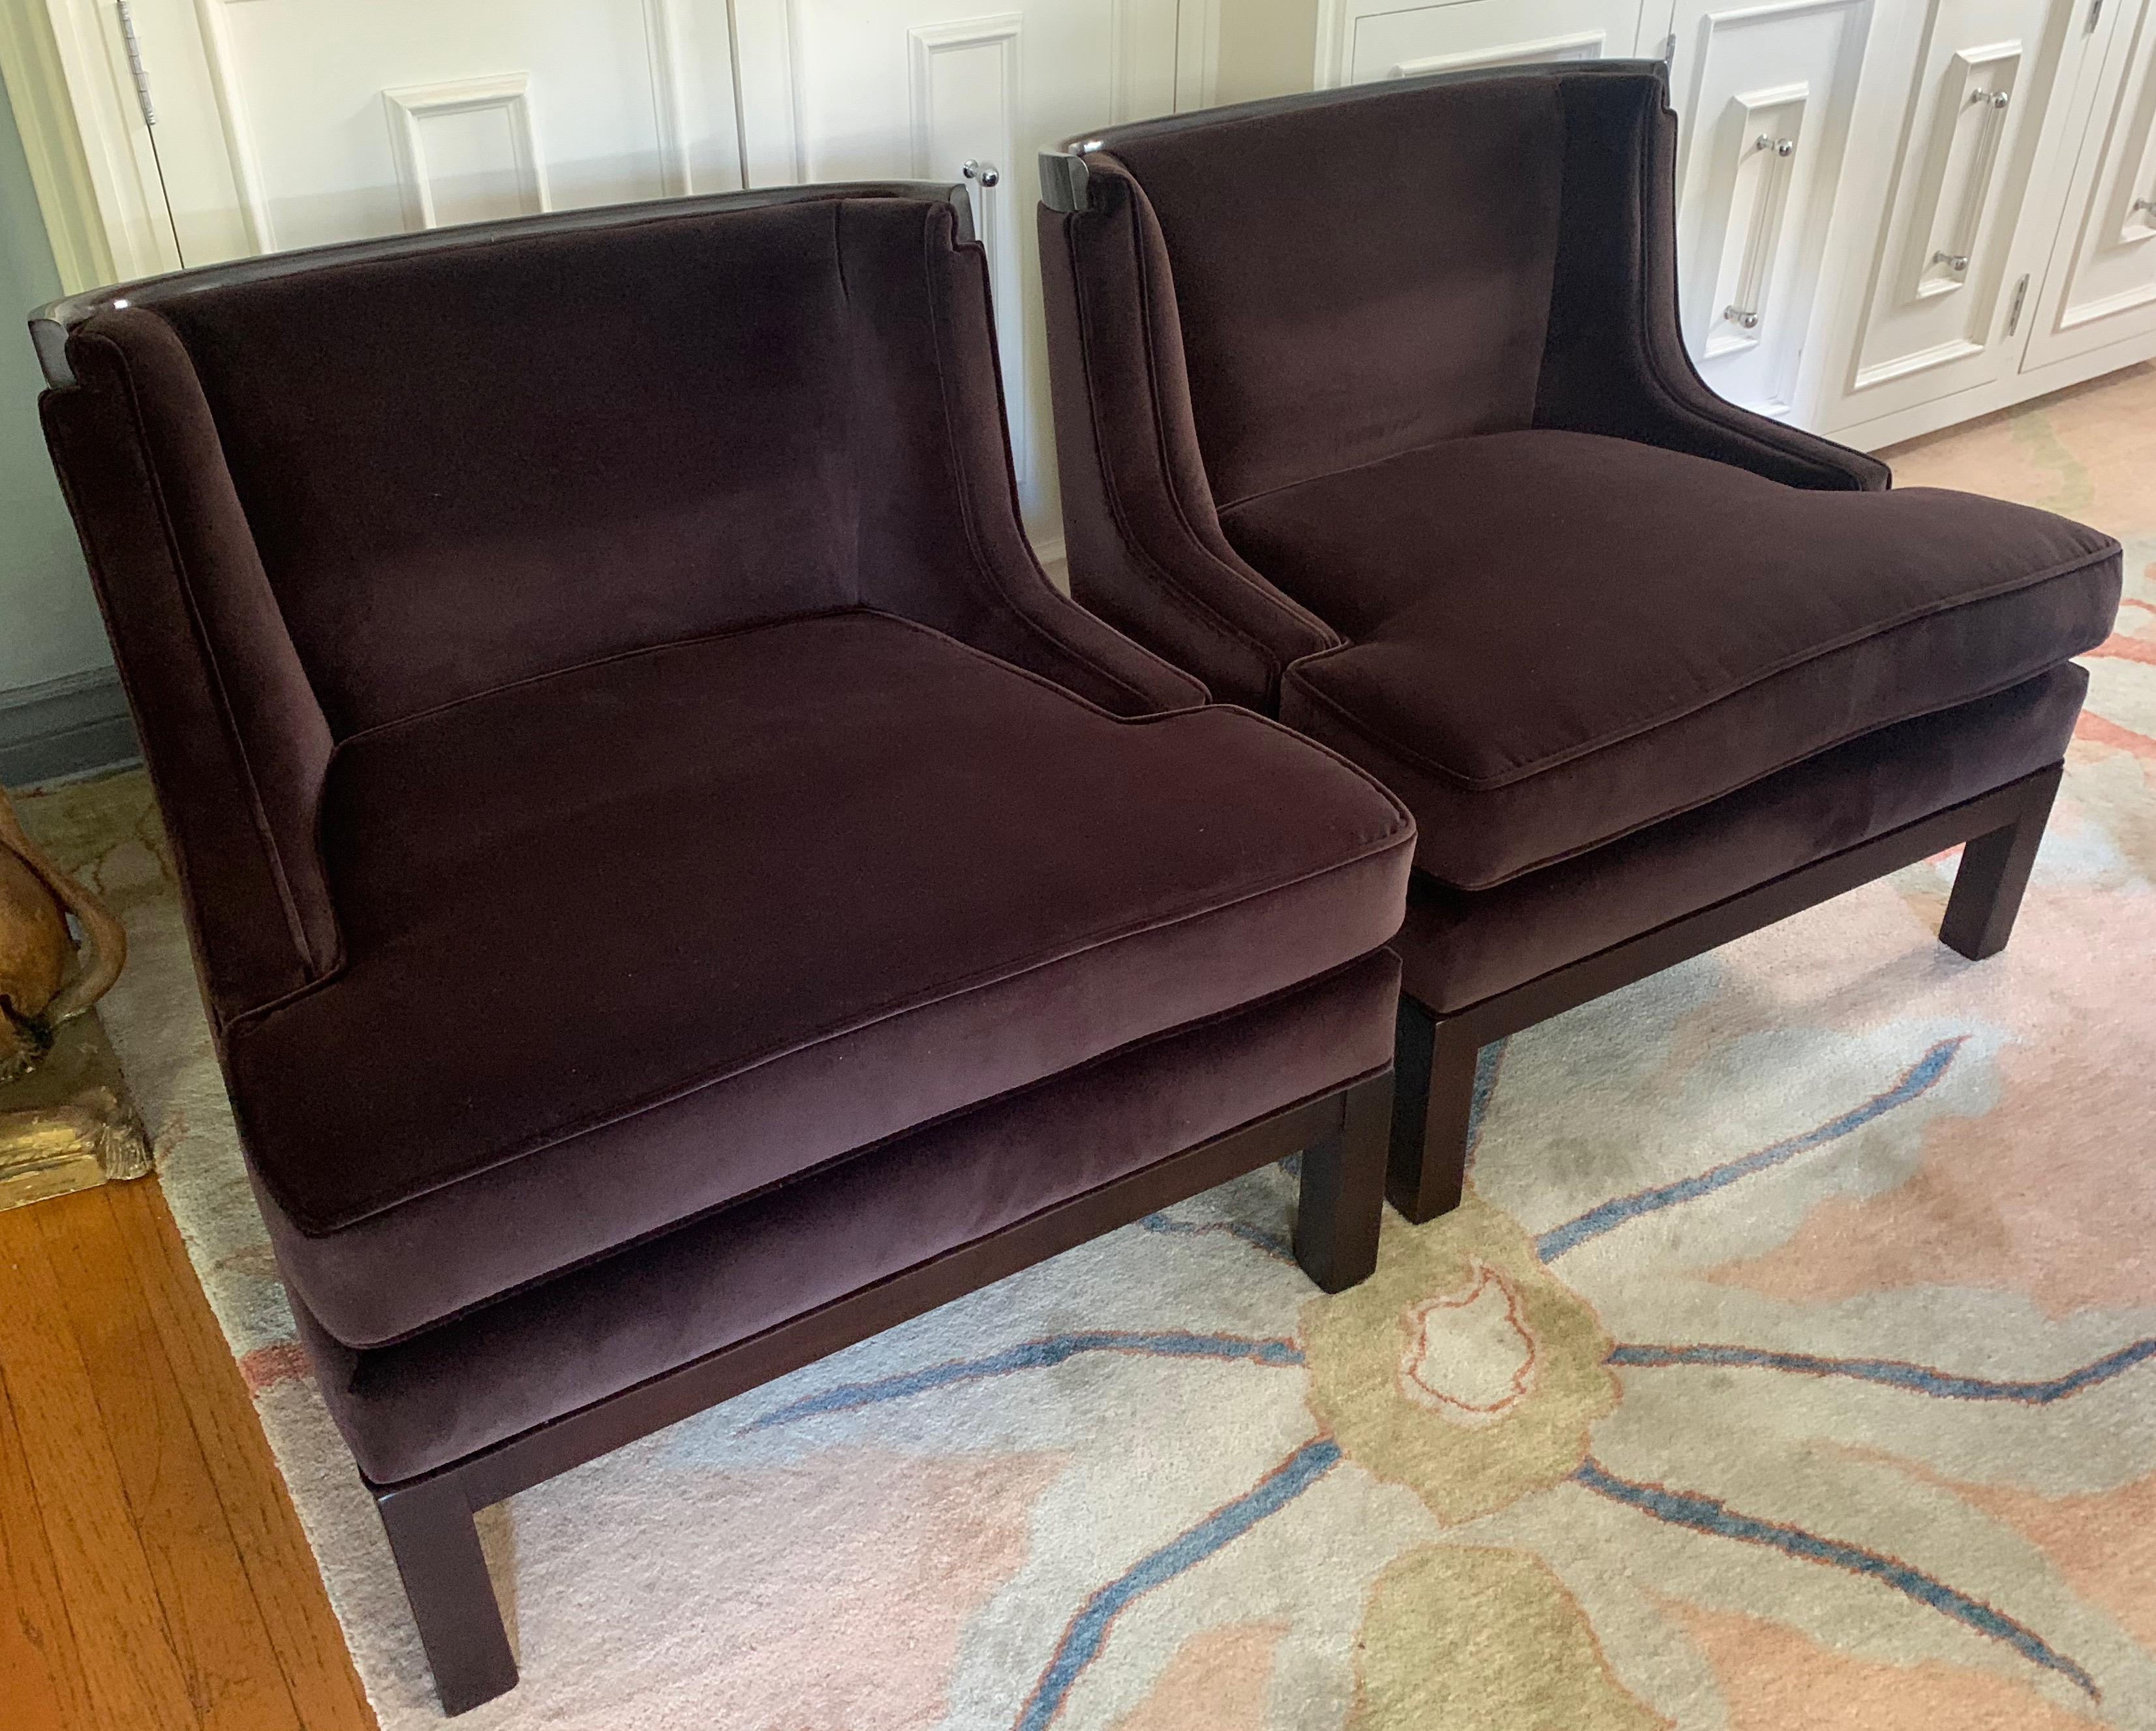 Pair of Tomlinson style chairs, frames and upholstery is new. An original painted frame has been refinished in a dark walnut, with upholstery in dark chocolate mohair.

A handsome pair of chairs, low and sexy, perfect for the library, bedroom or